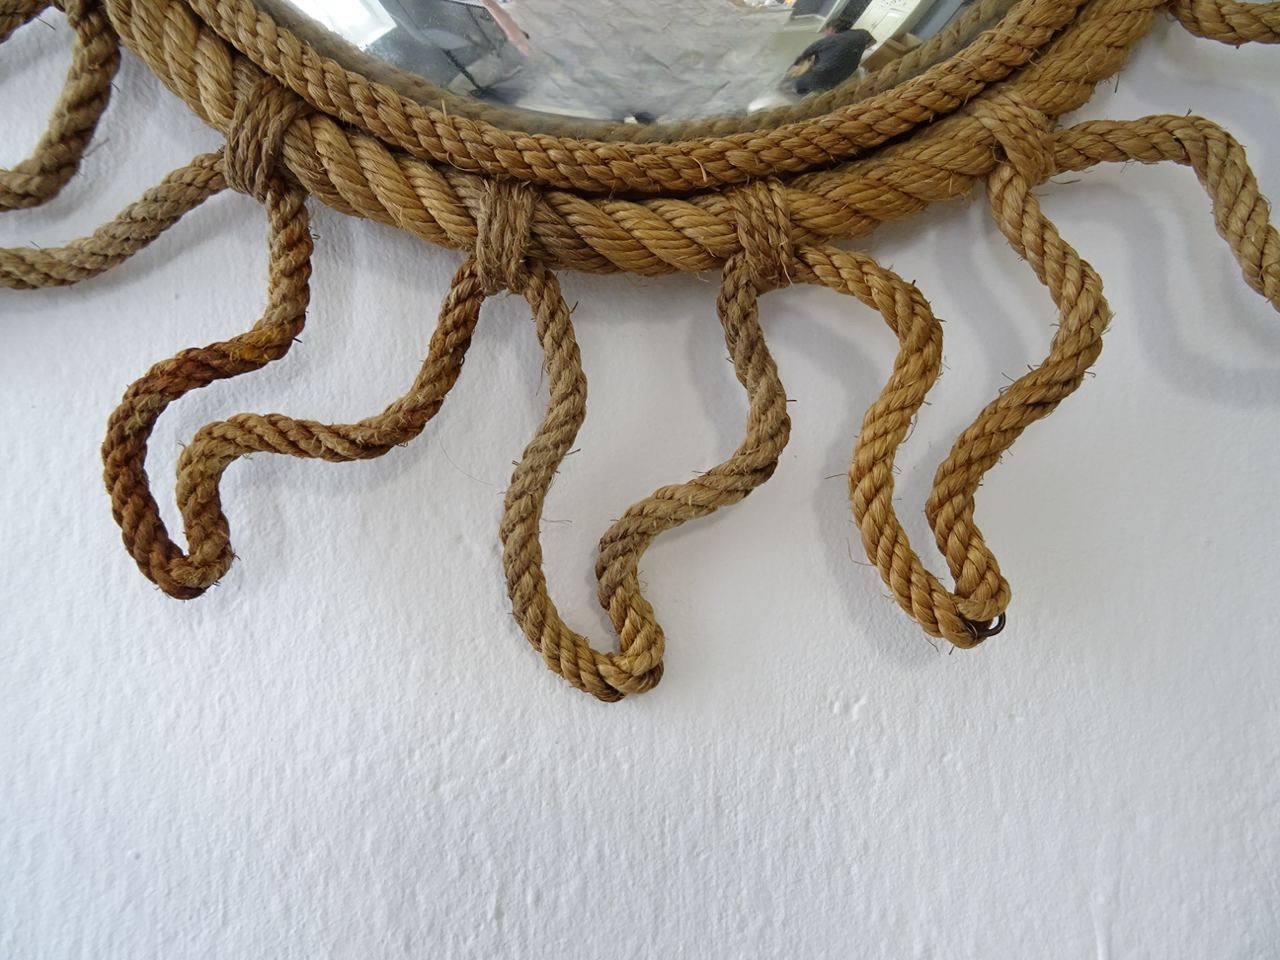 Rare sunburst rope convex mirror made by Adrien Audoux and Frida Minet. Free priority UPS shipping from Italy with no custom fees.